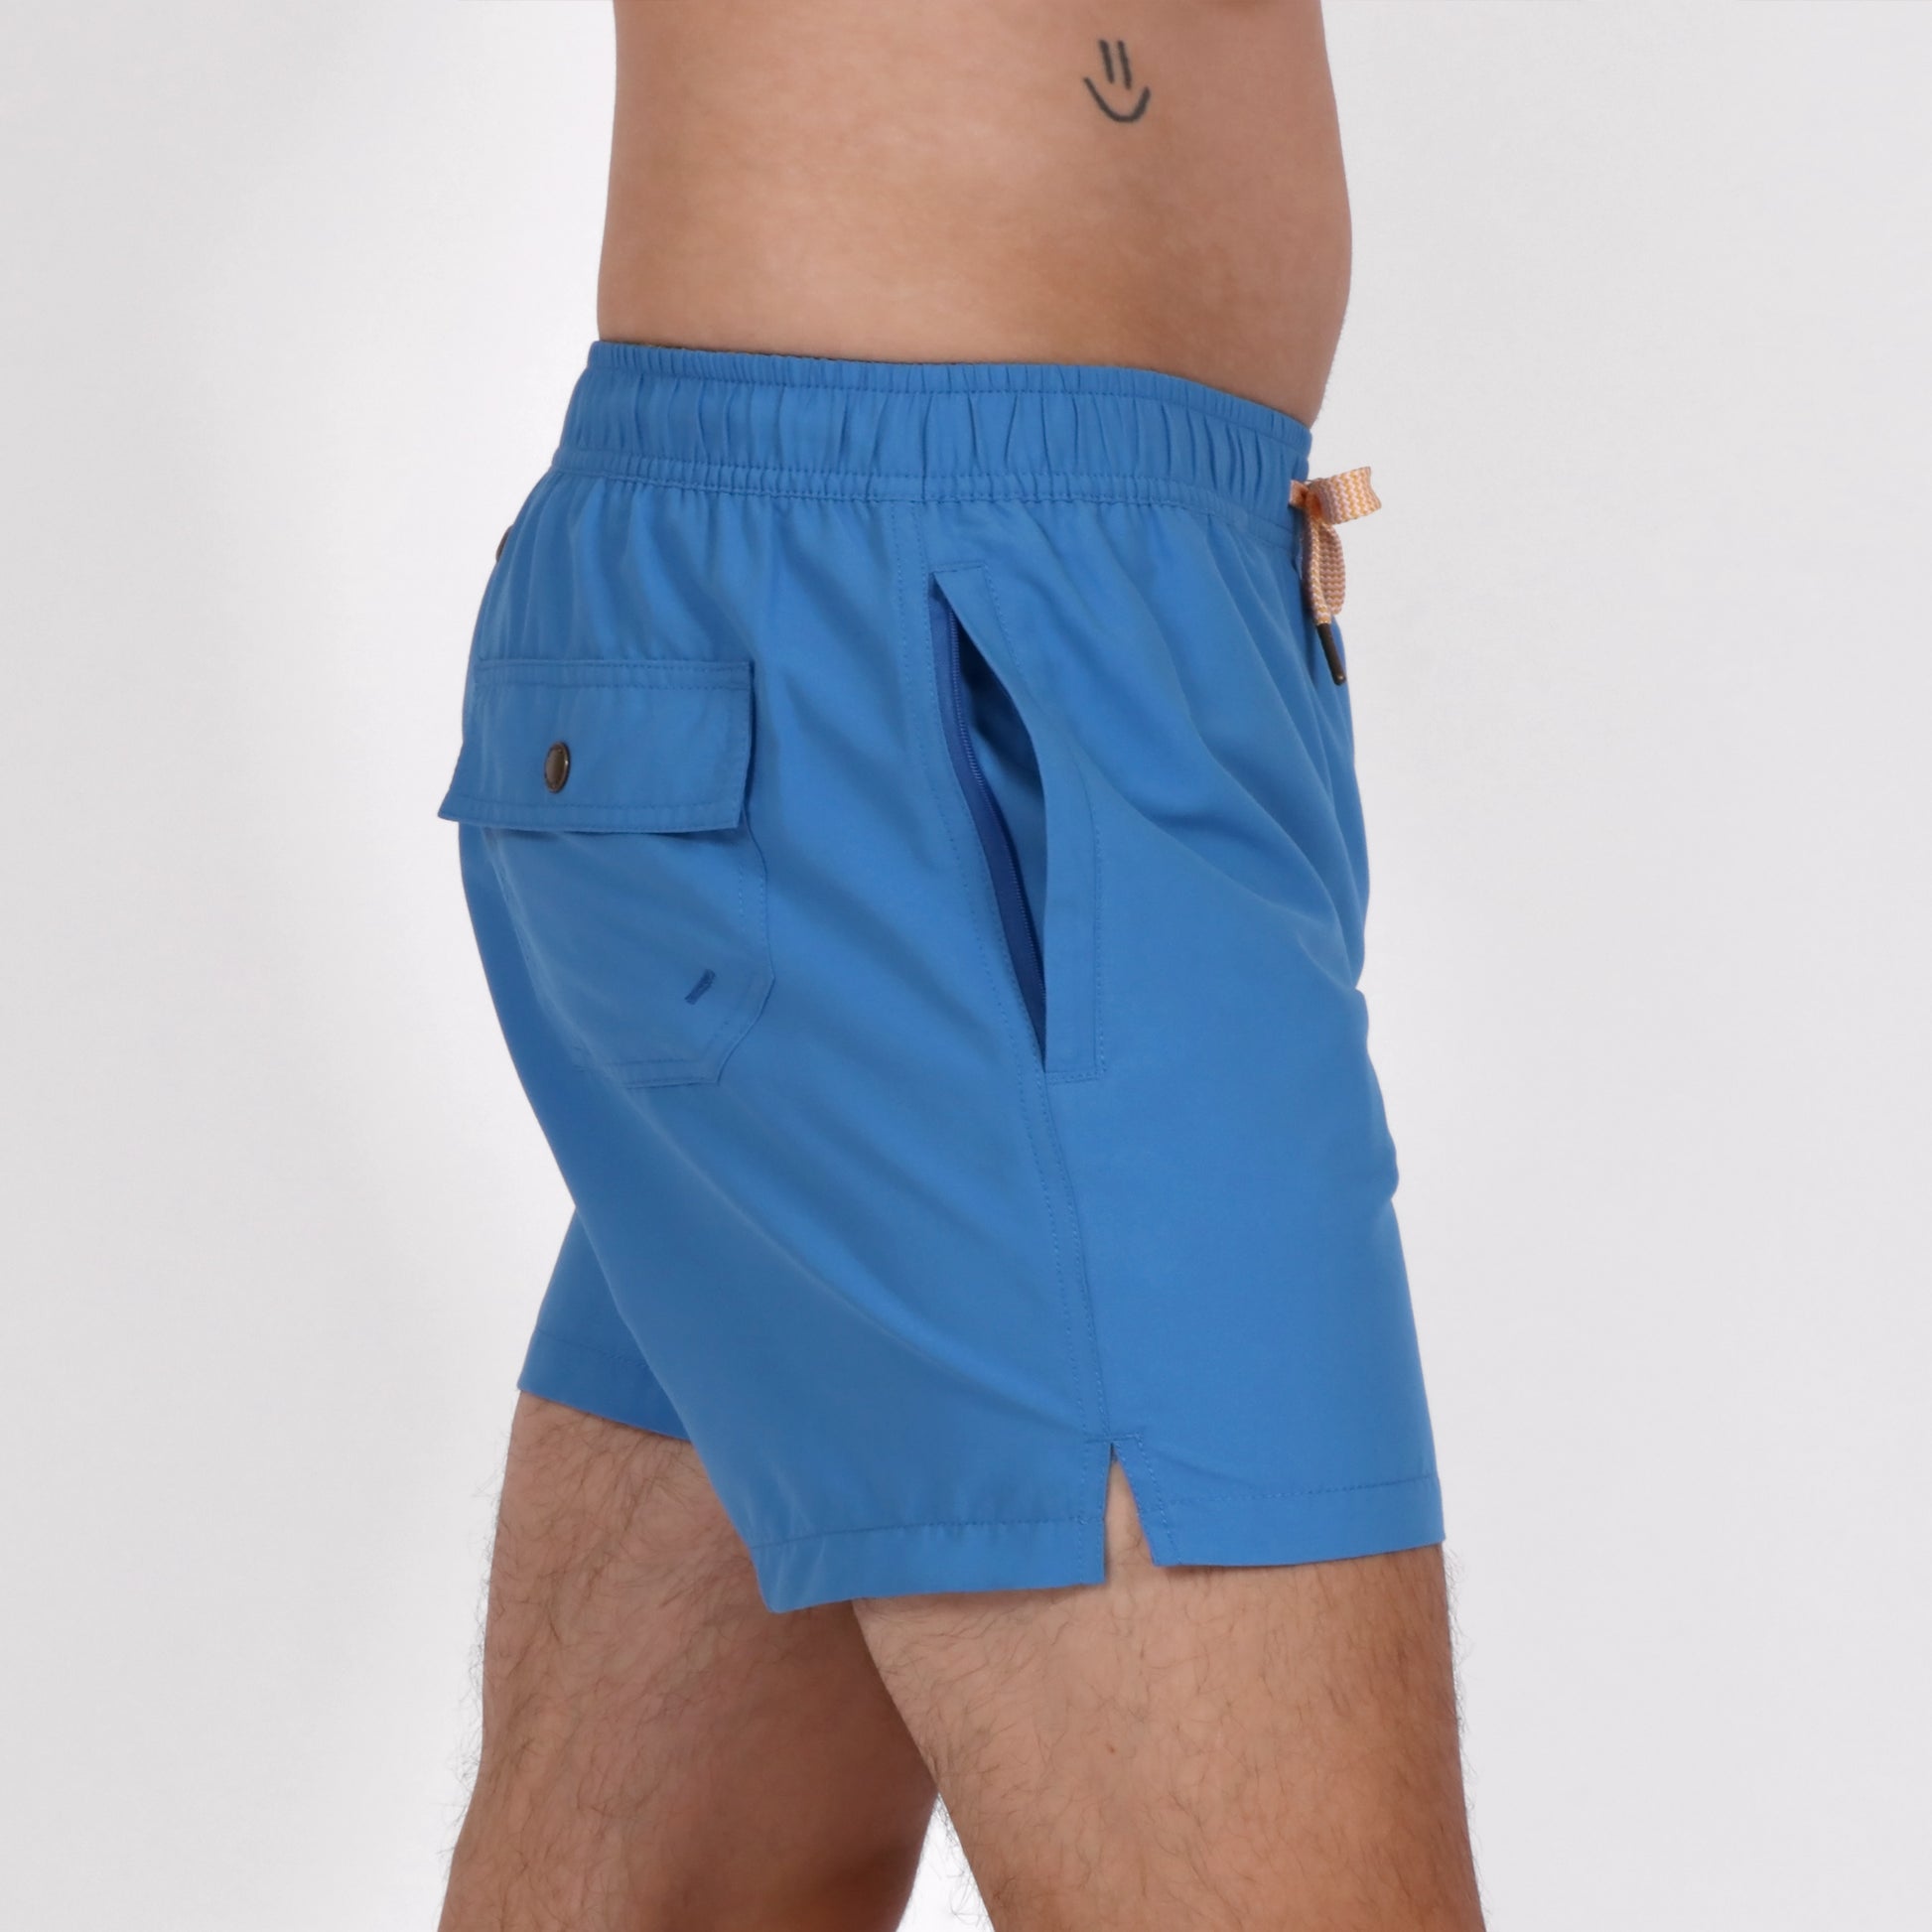 OWSS2203 AZURE BLUE SOLID COLOUR SWIM SHORT RECYCLED POLYESTER SIDE VIEW POCKETS